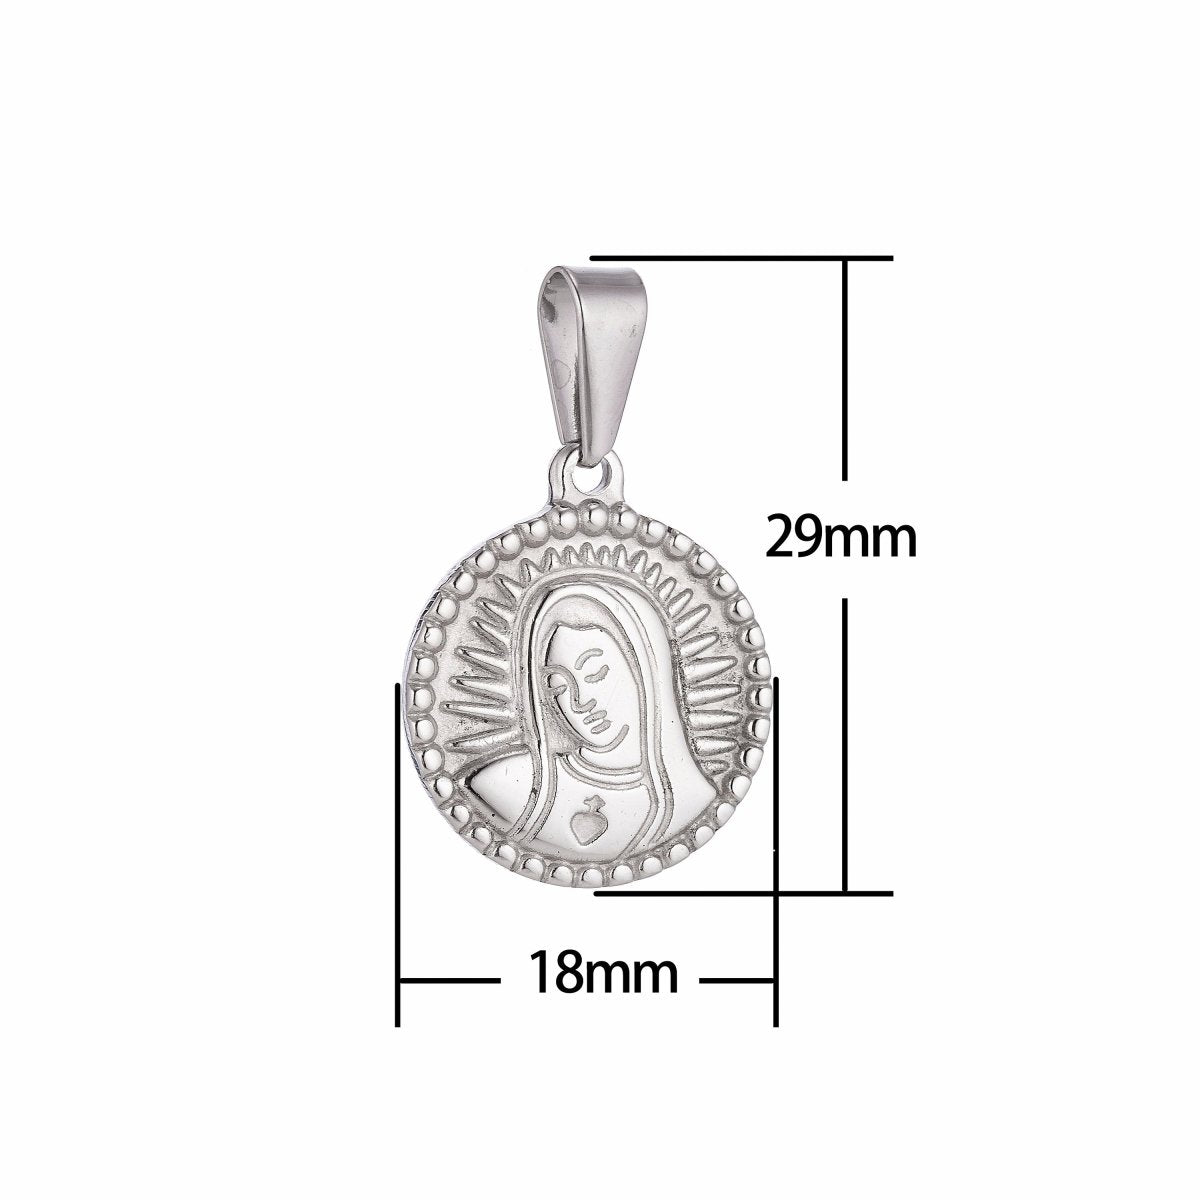 Gold Filled Stainless Steel Mary Mother Jesus Glooming Charm Pendant w/ Bails Findings for Earring Necklace Jewelry Making Supplies J-349 - DLUXCA